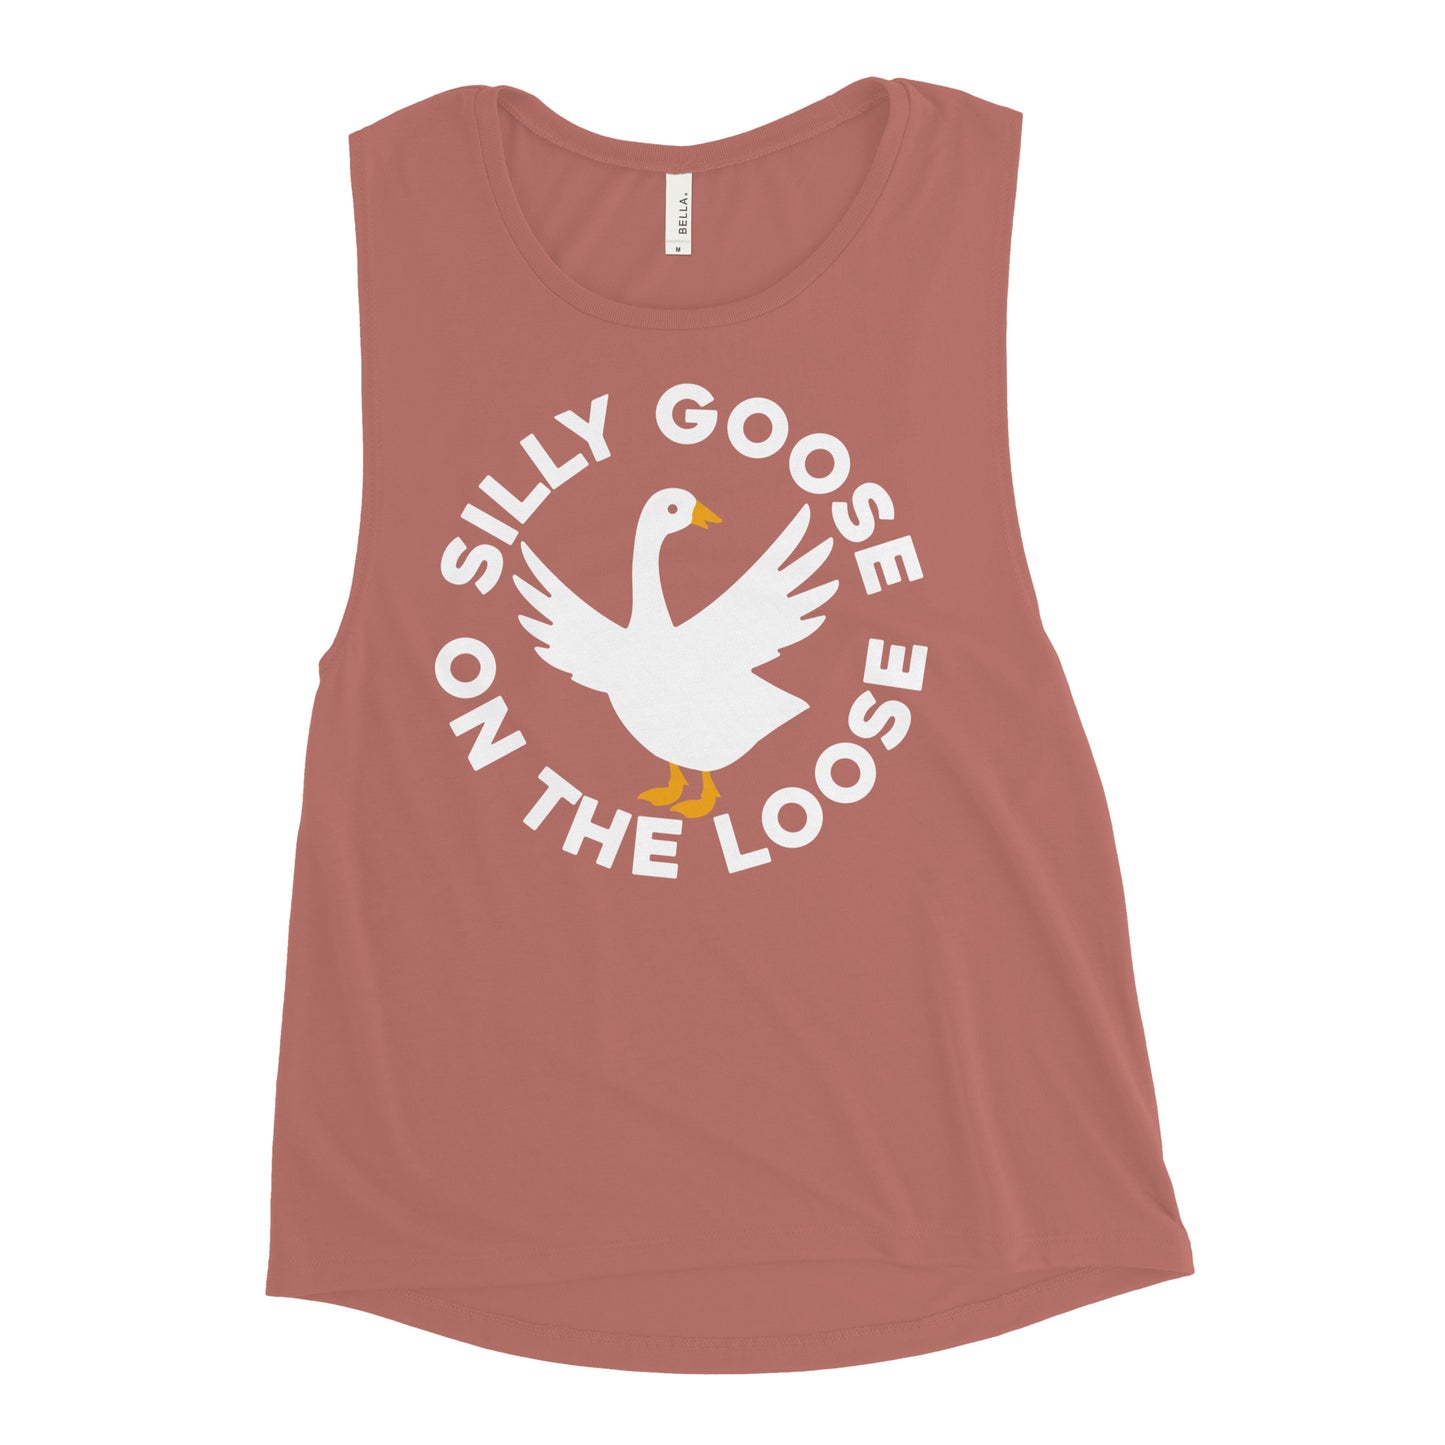 Silly Goose On The Loose Women's Muscle Tank